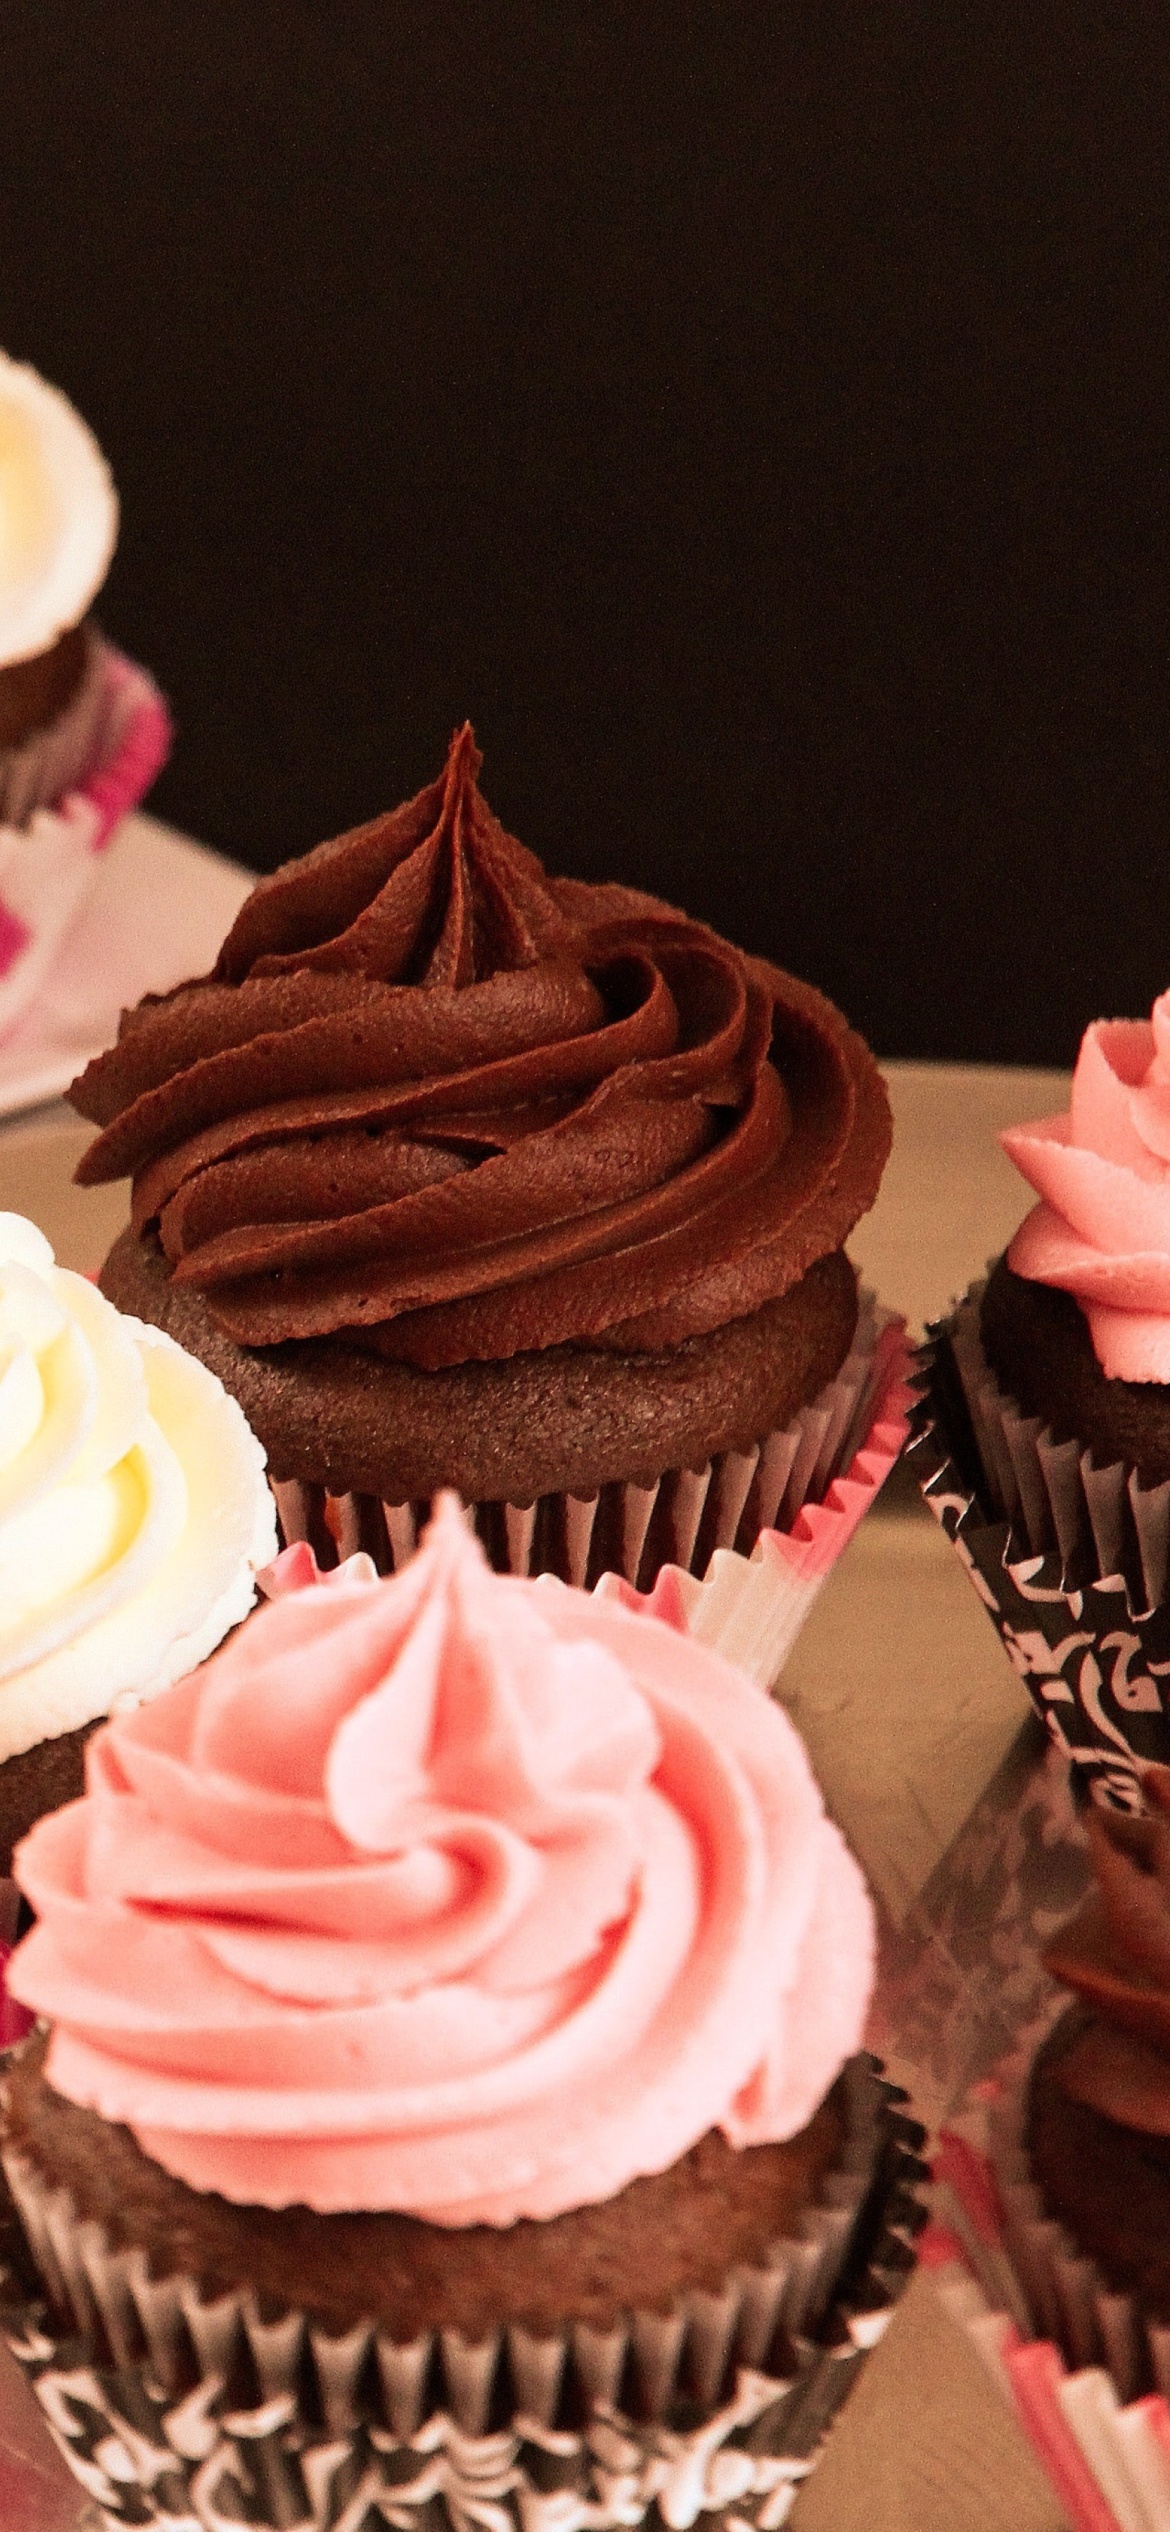 Cupcakes with Creme wallpaper 1170x2532